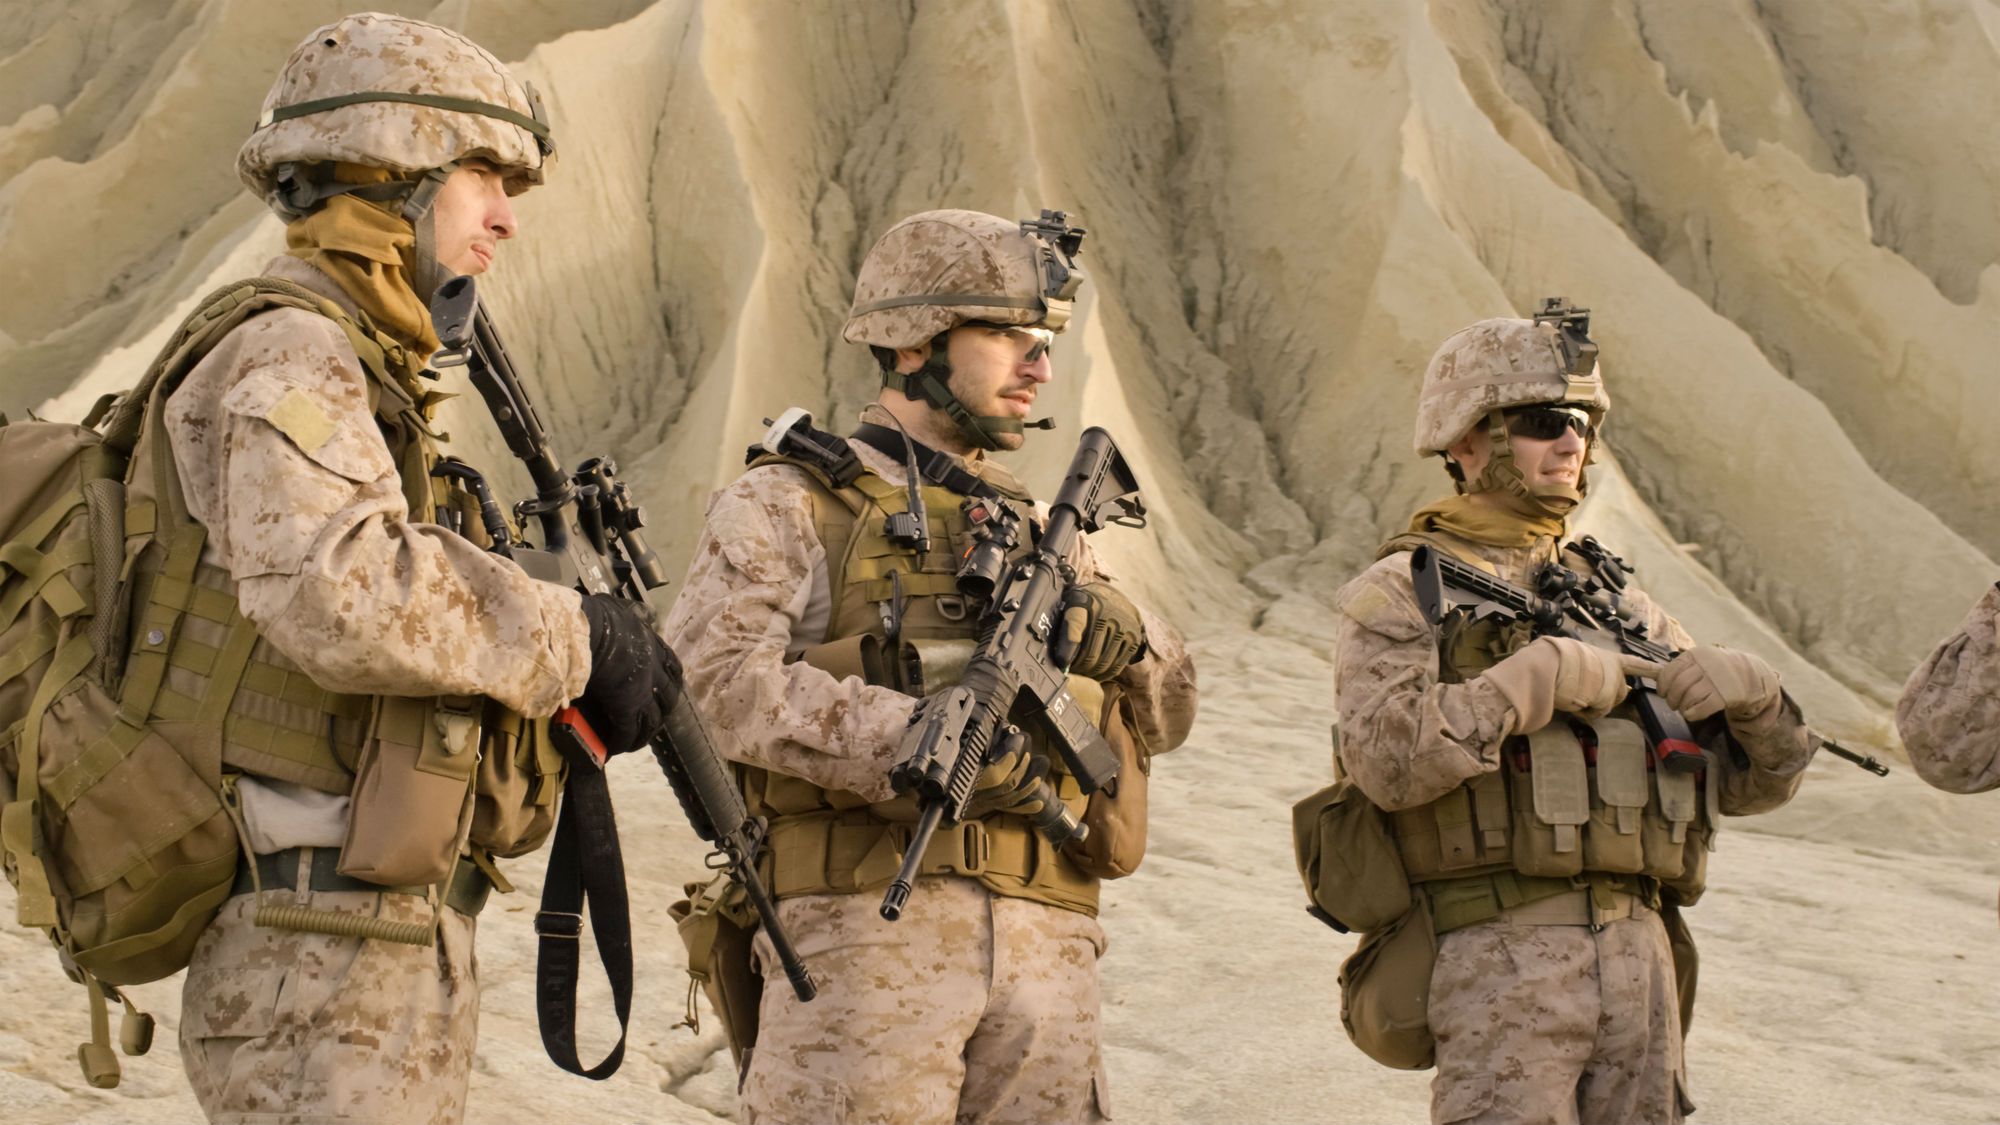 Three soldiers in the desert